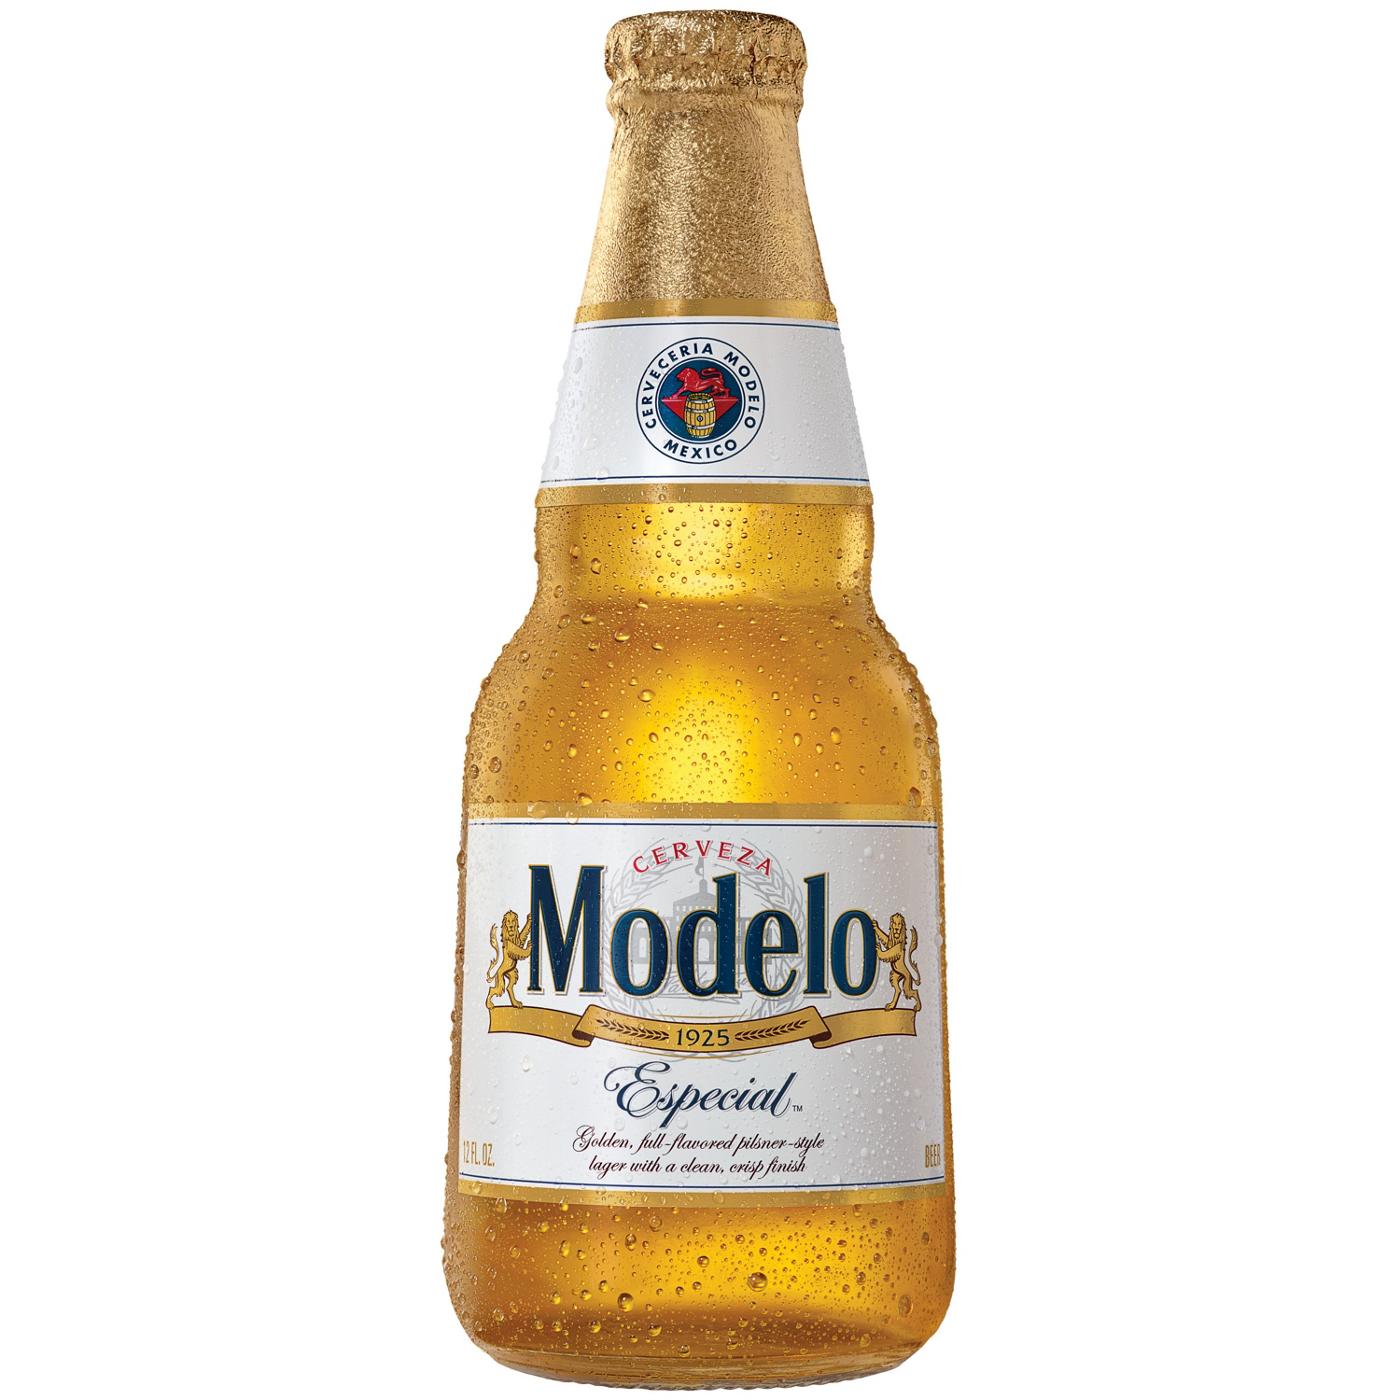 Modelo Especial Mexican Lager Import Beer 12 oz Bottles, 24 pk; image 3 of 10